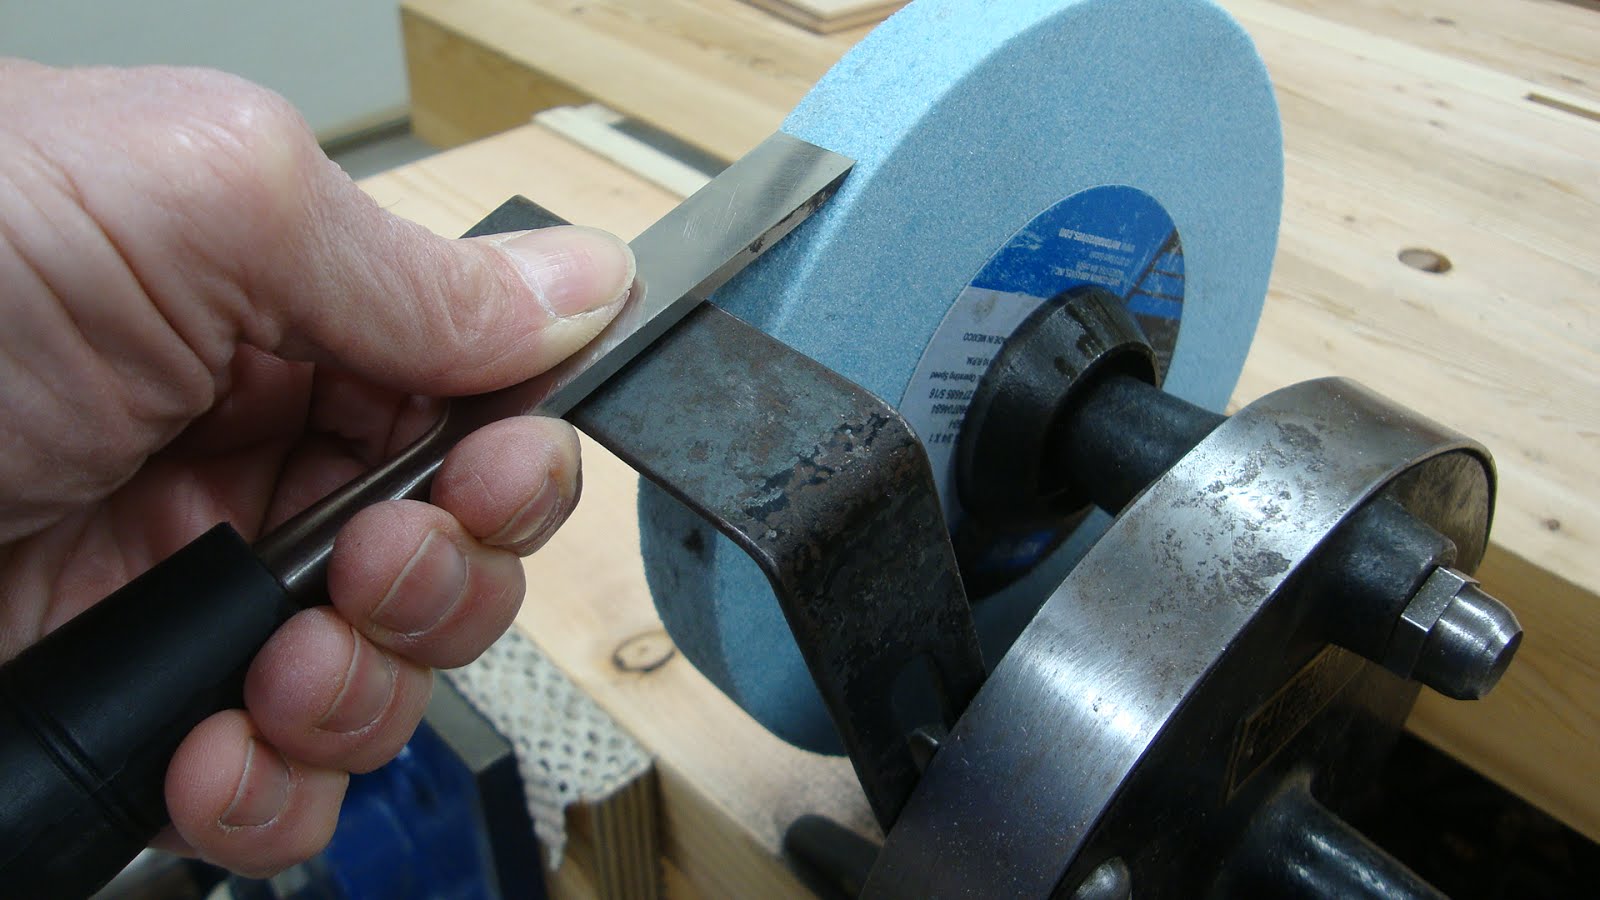 Woodworking in a Tiny Shop: More on the Hand Crank Grinder